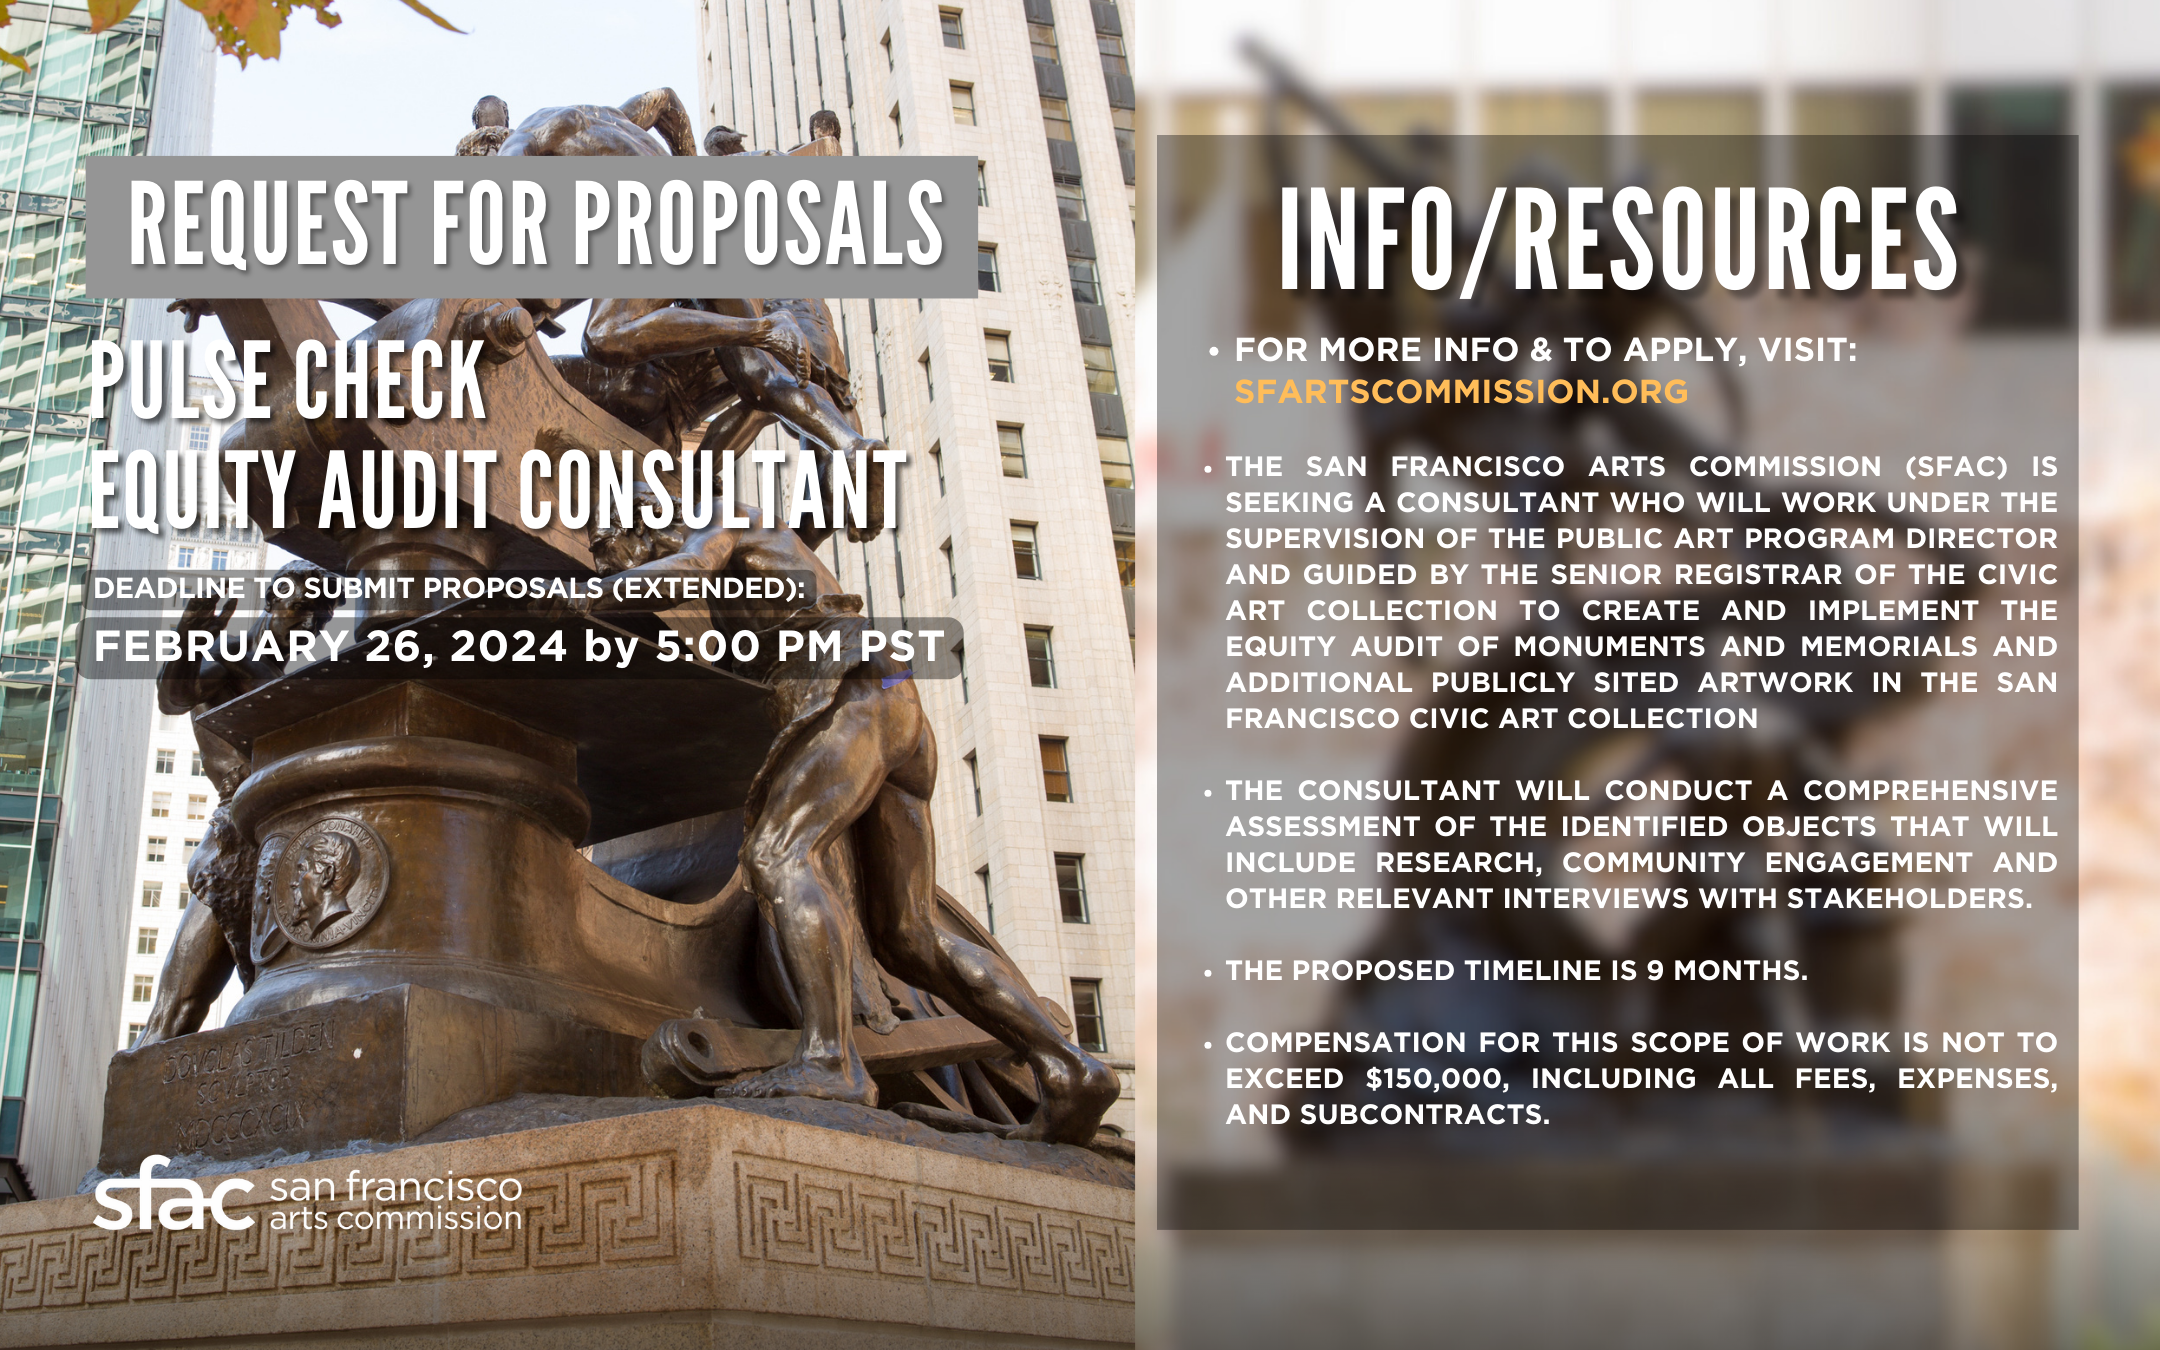 Request for Proposal Graphic Image of Mechanics Monument February 26 2024 deadline by 5 pm pst